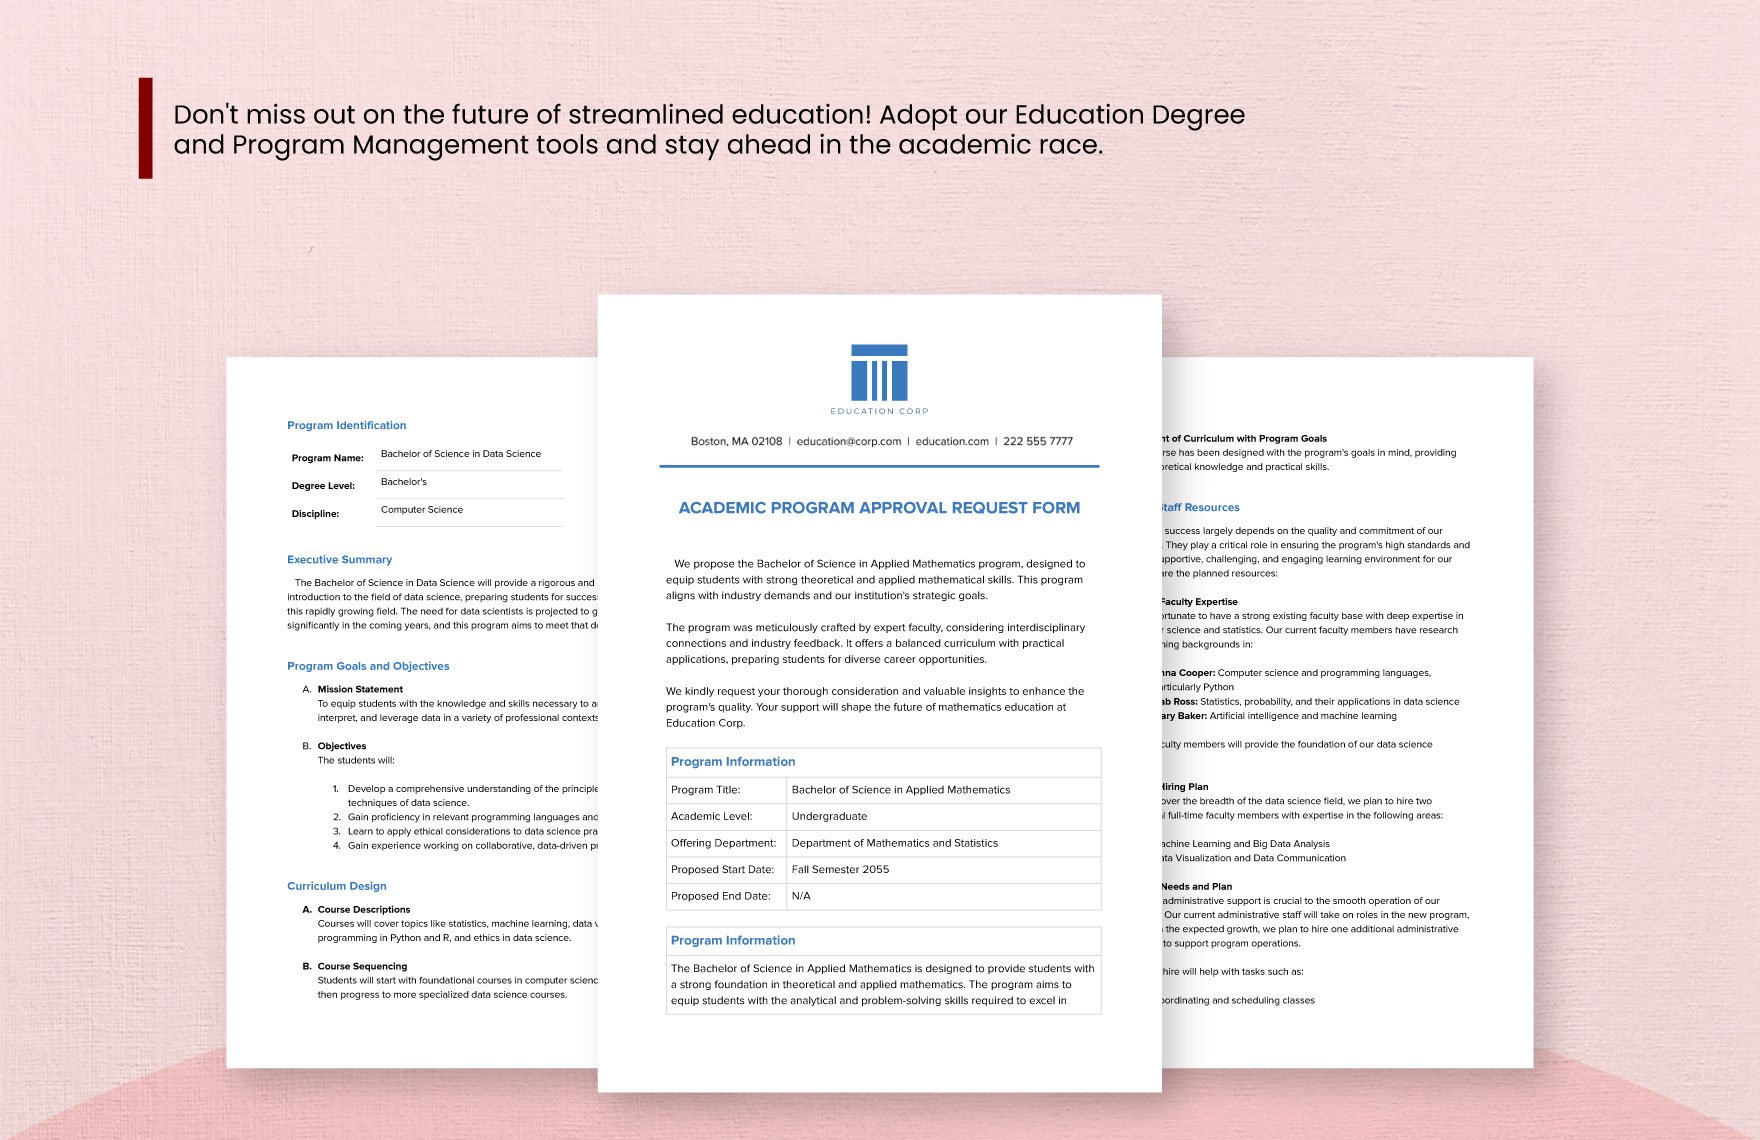 Academic Program Approval Request Form Template